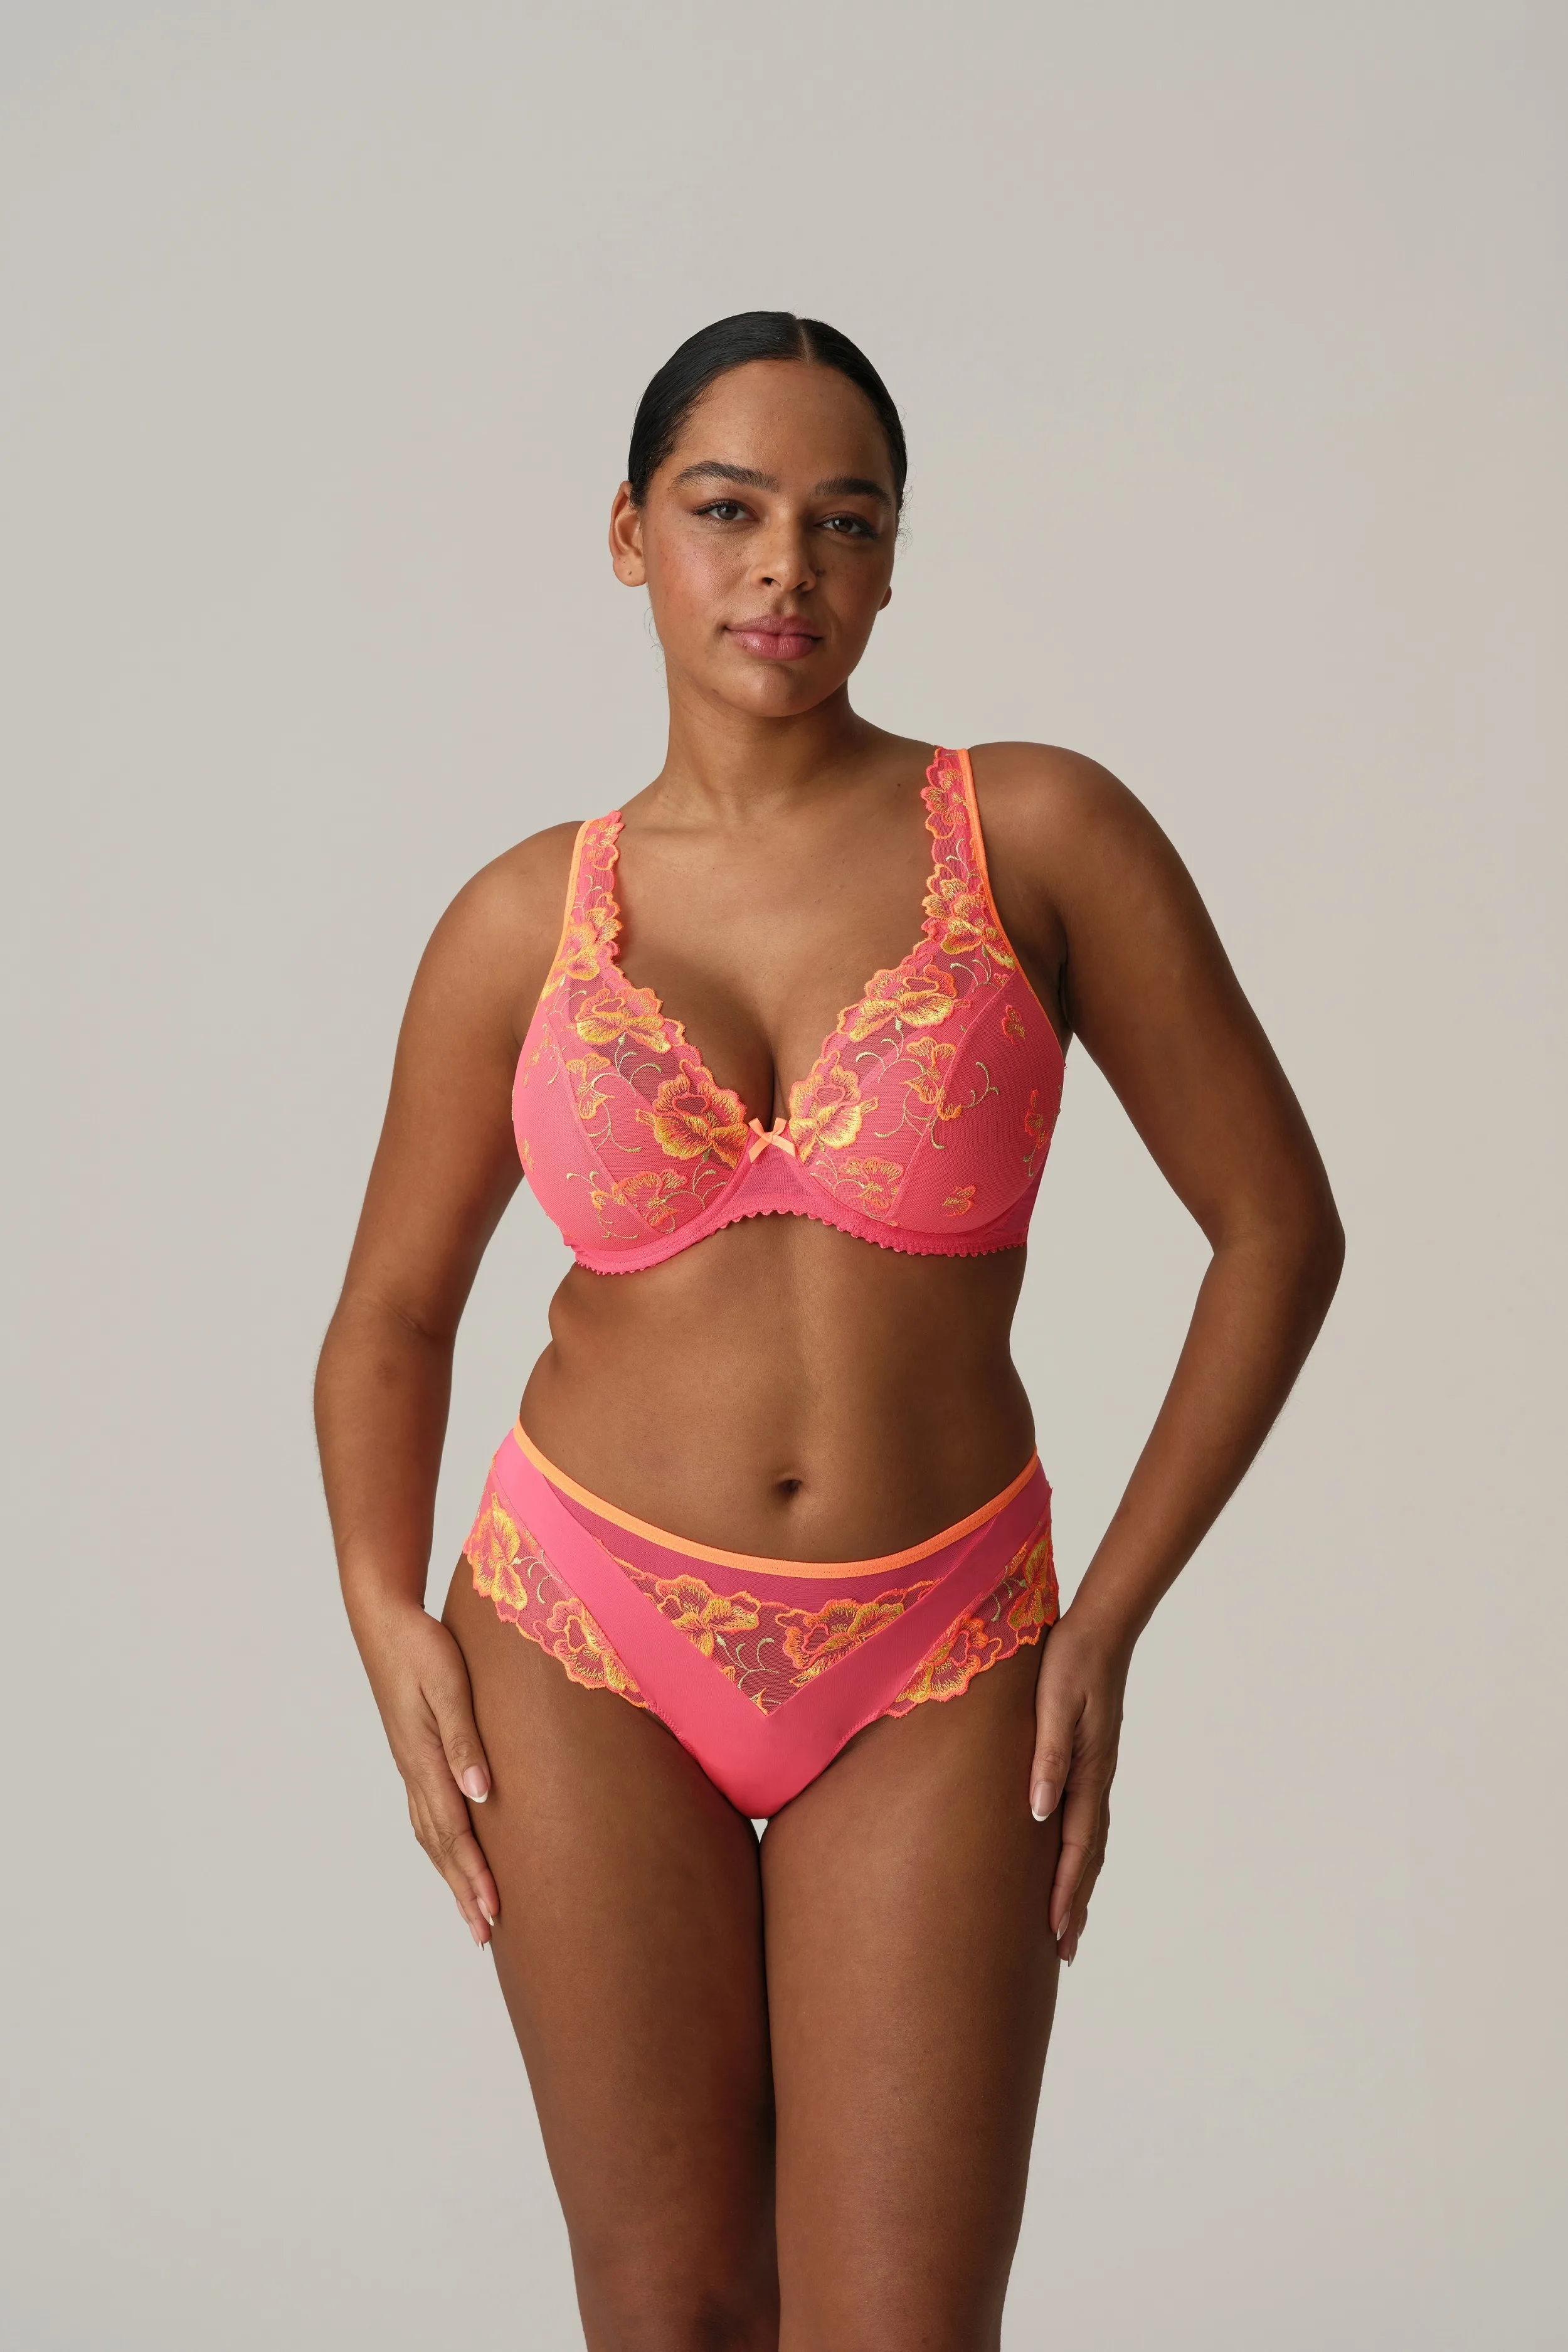 FULL COVERAGE B & C CUP BRA ✓Lightly Padded. ✓Has Underwire